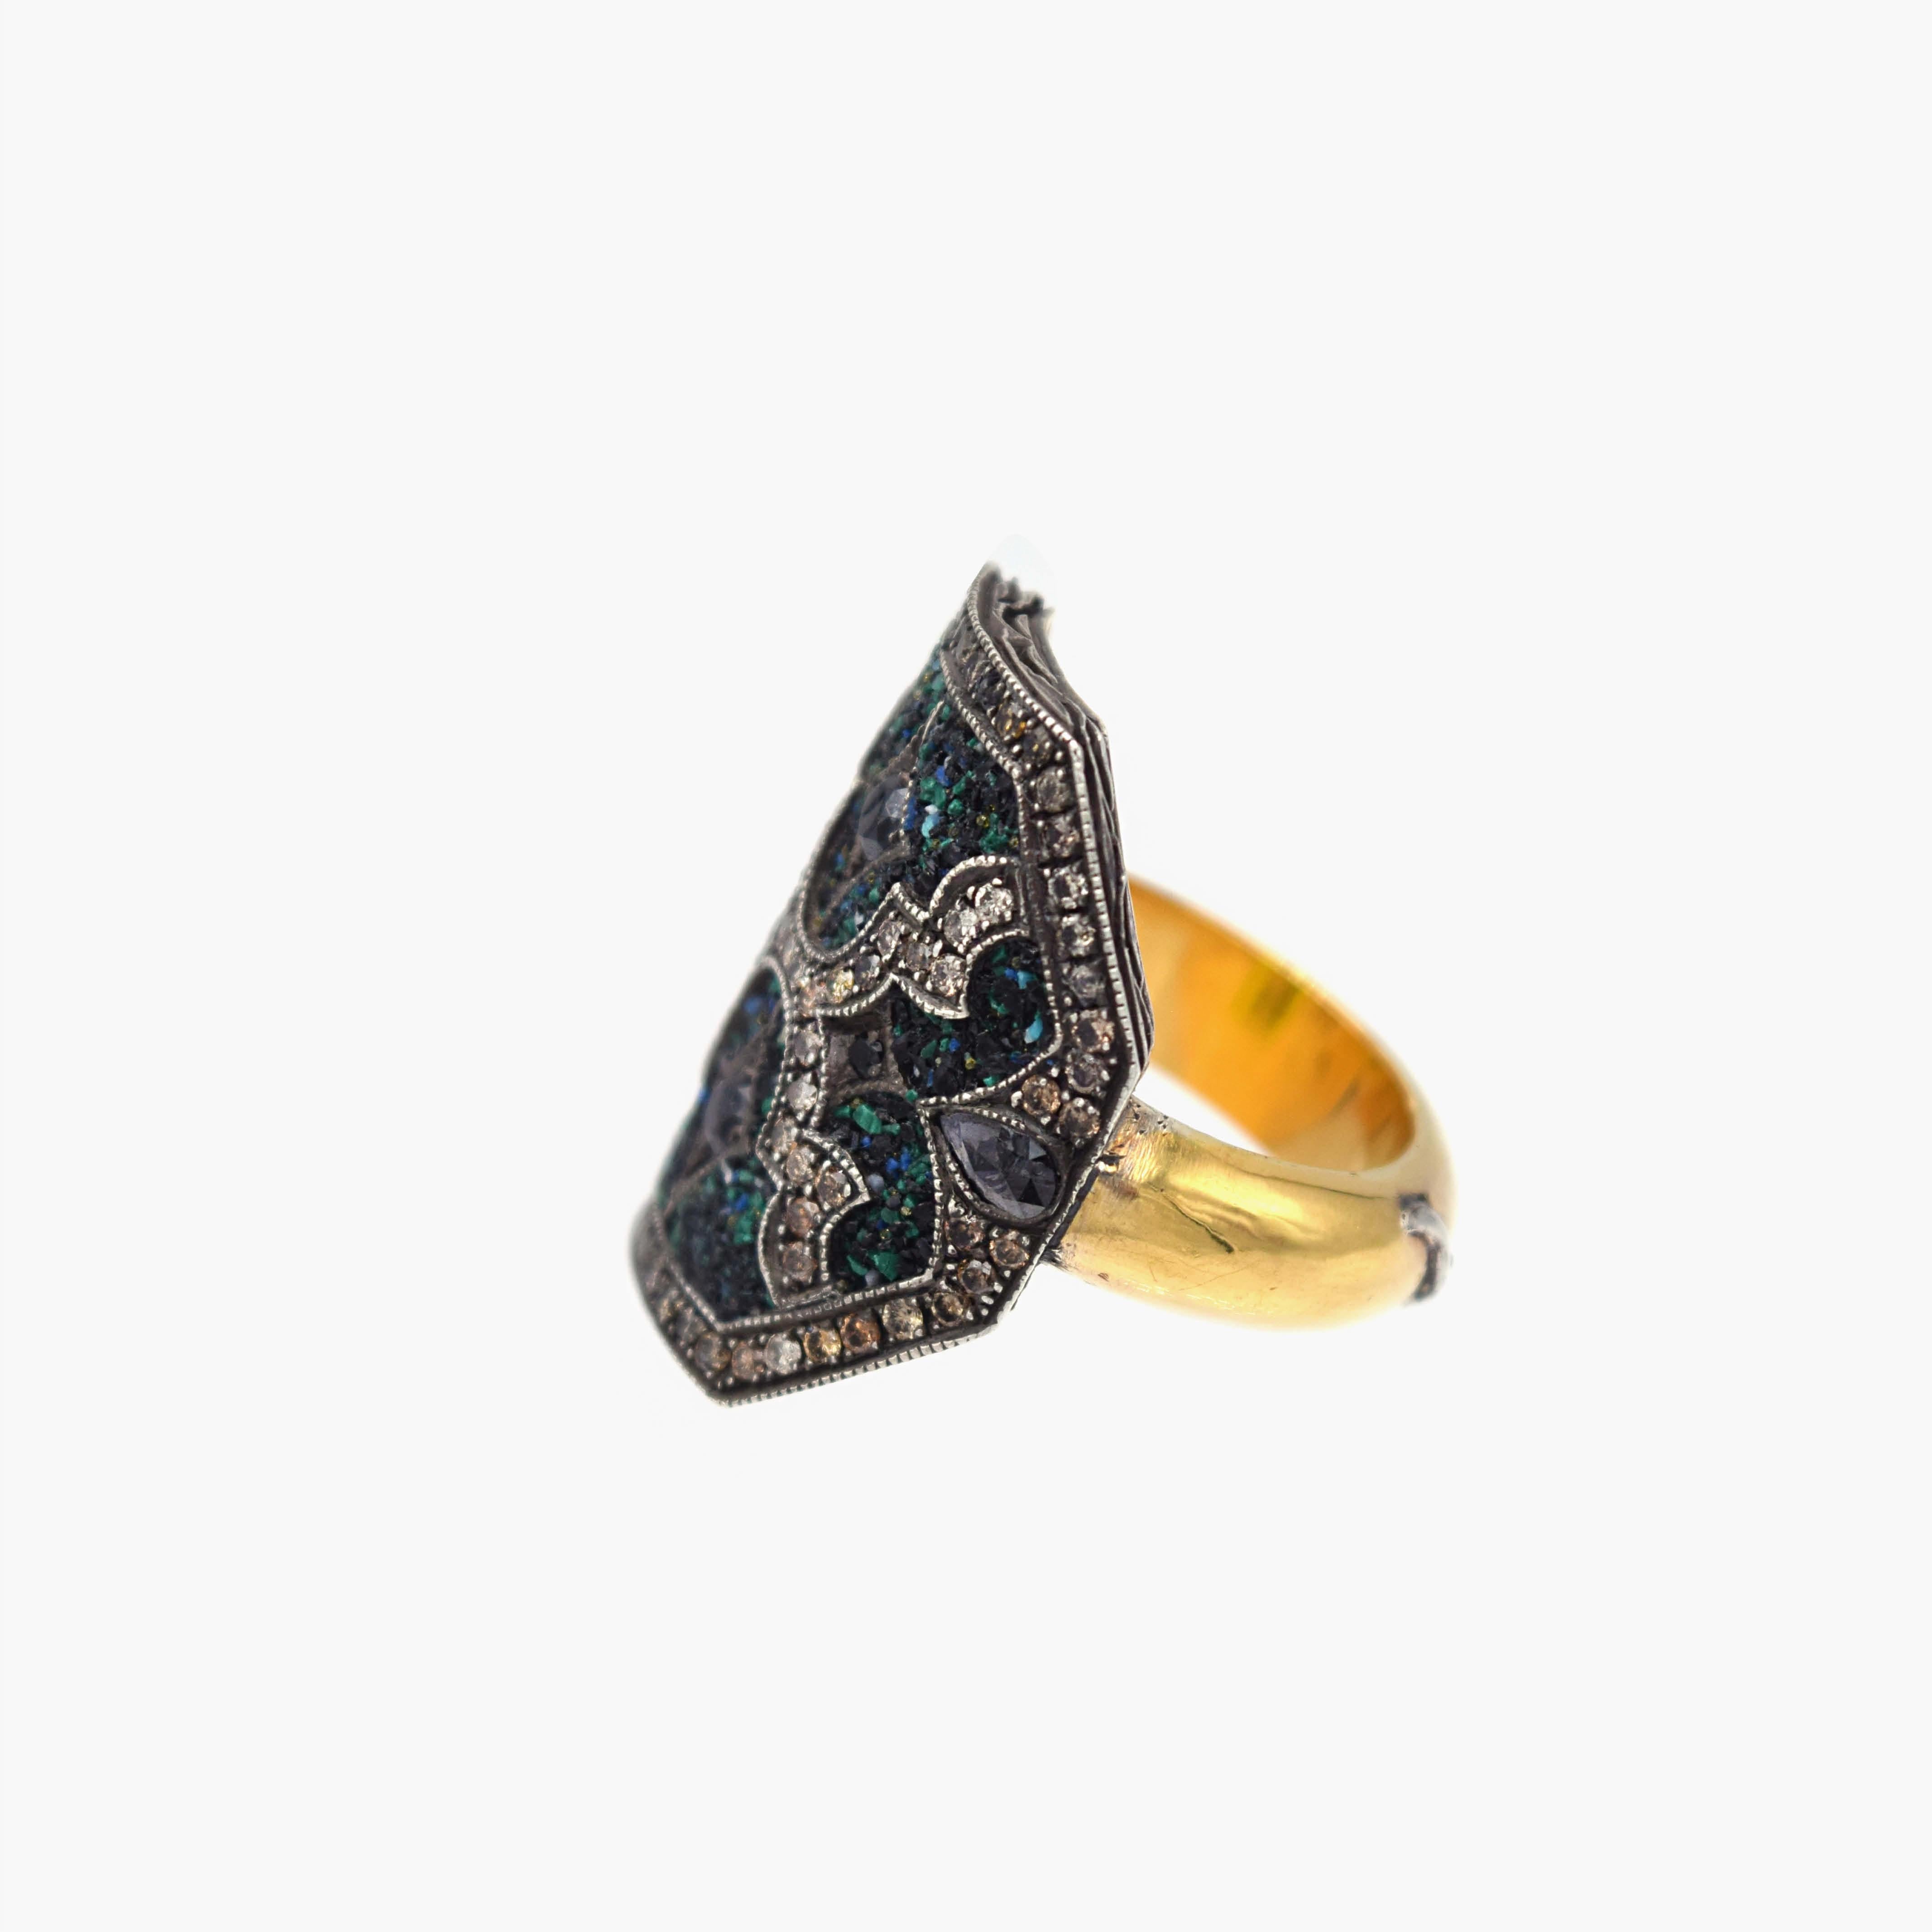 From the astounding work of Sevan Biçakçi, inspired
by the rich culture rooted in his homeland of Istanbul,
this collection represents the layered and beautiful
history of our past.
This ring features unique mosaics work of malachites,
jet stones,